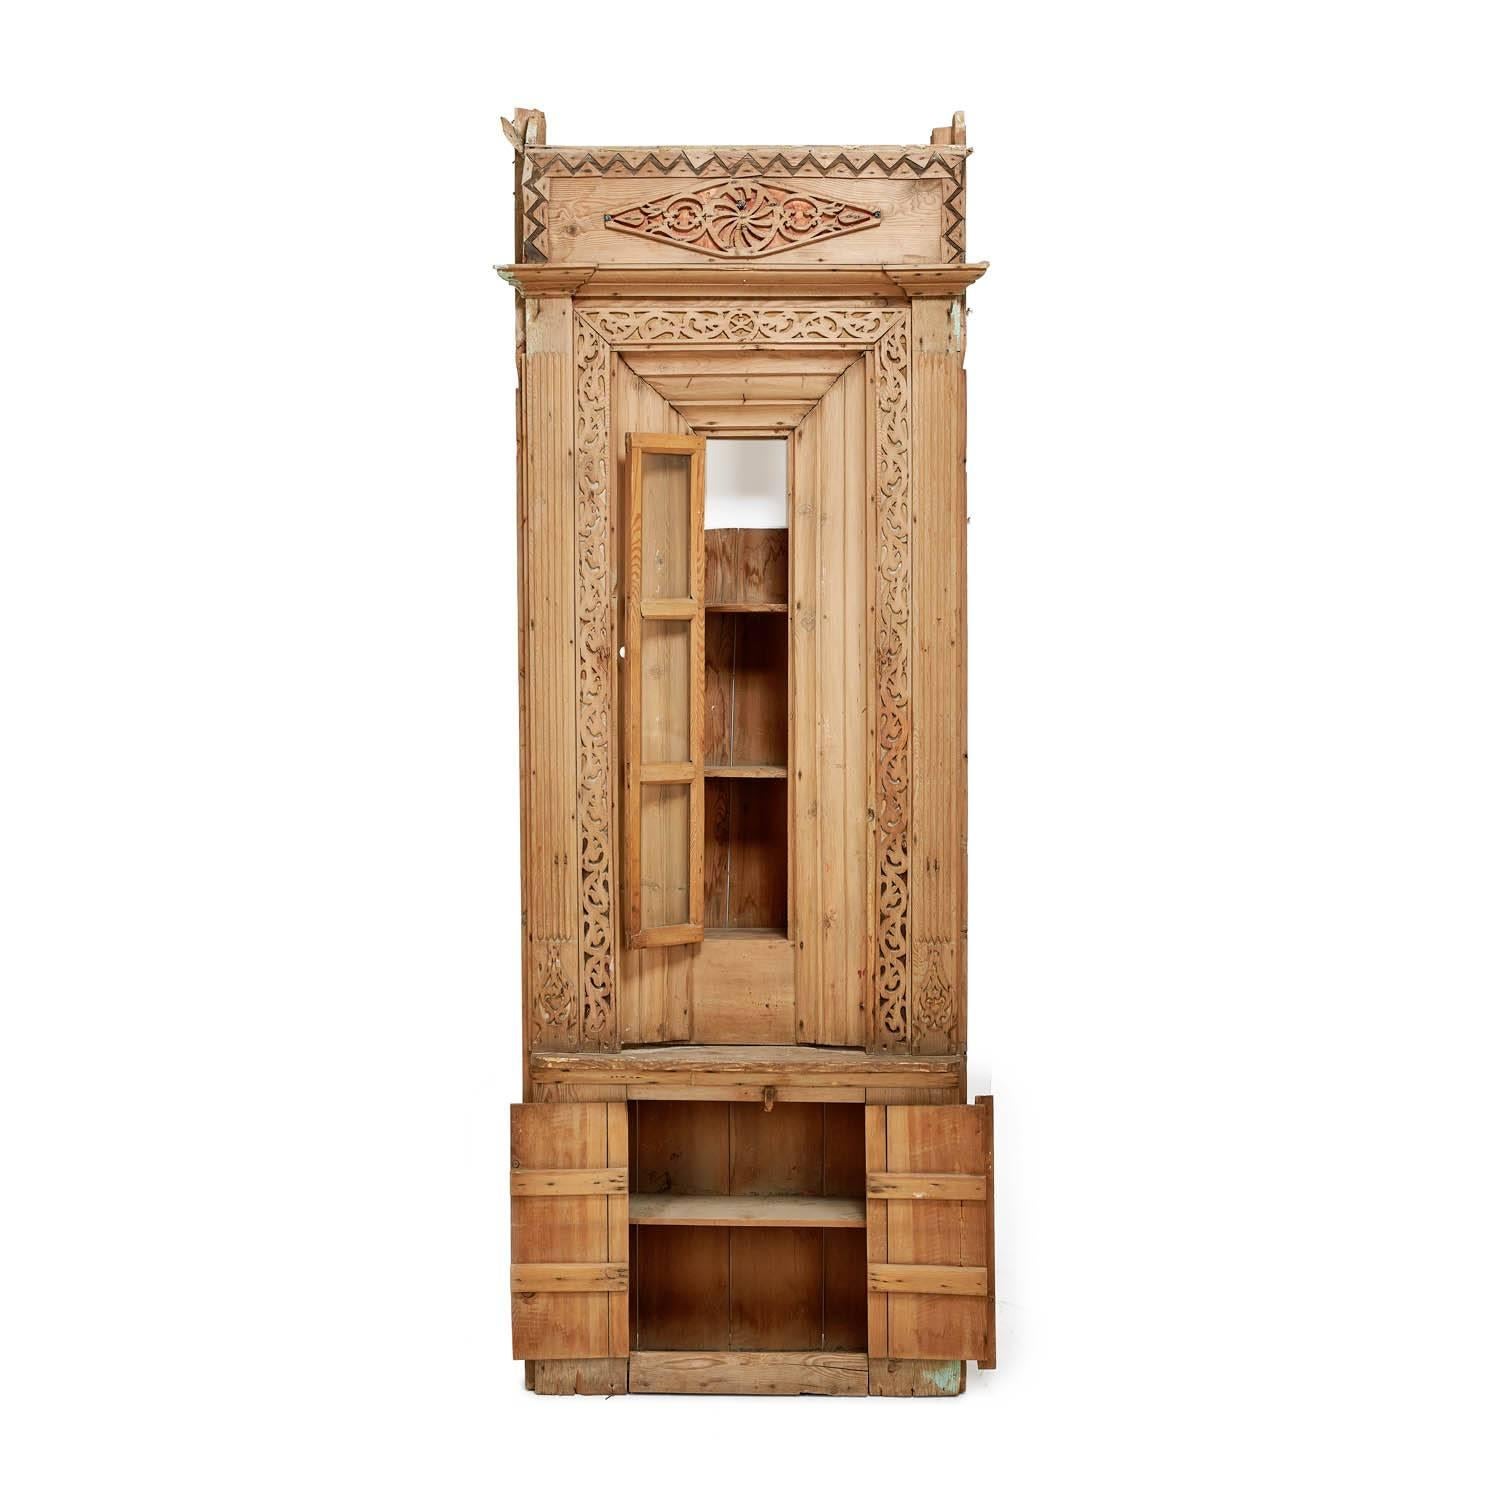 This Turkish cabinet has a meticulously carved lattice design which reflects the intricate wood carvings for which the Anatolian city of Konya is known. Set deep within its intricate border, a slender glass door opens to reveal three small shelves,